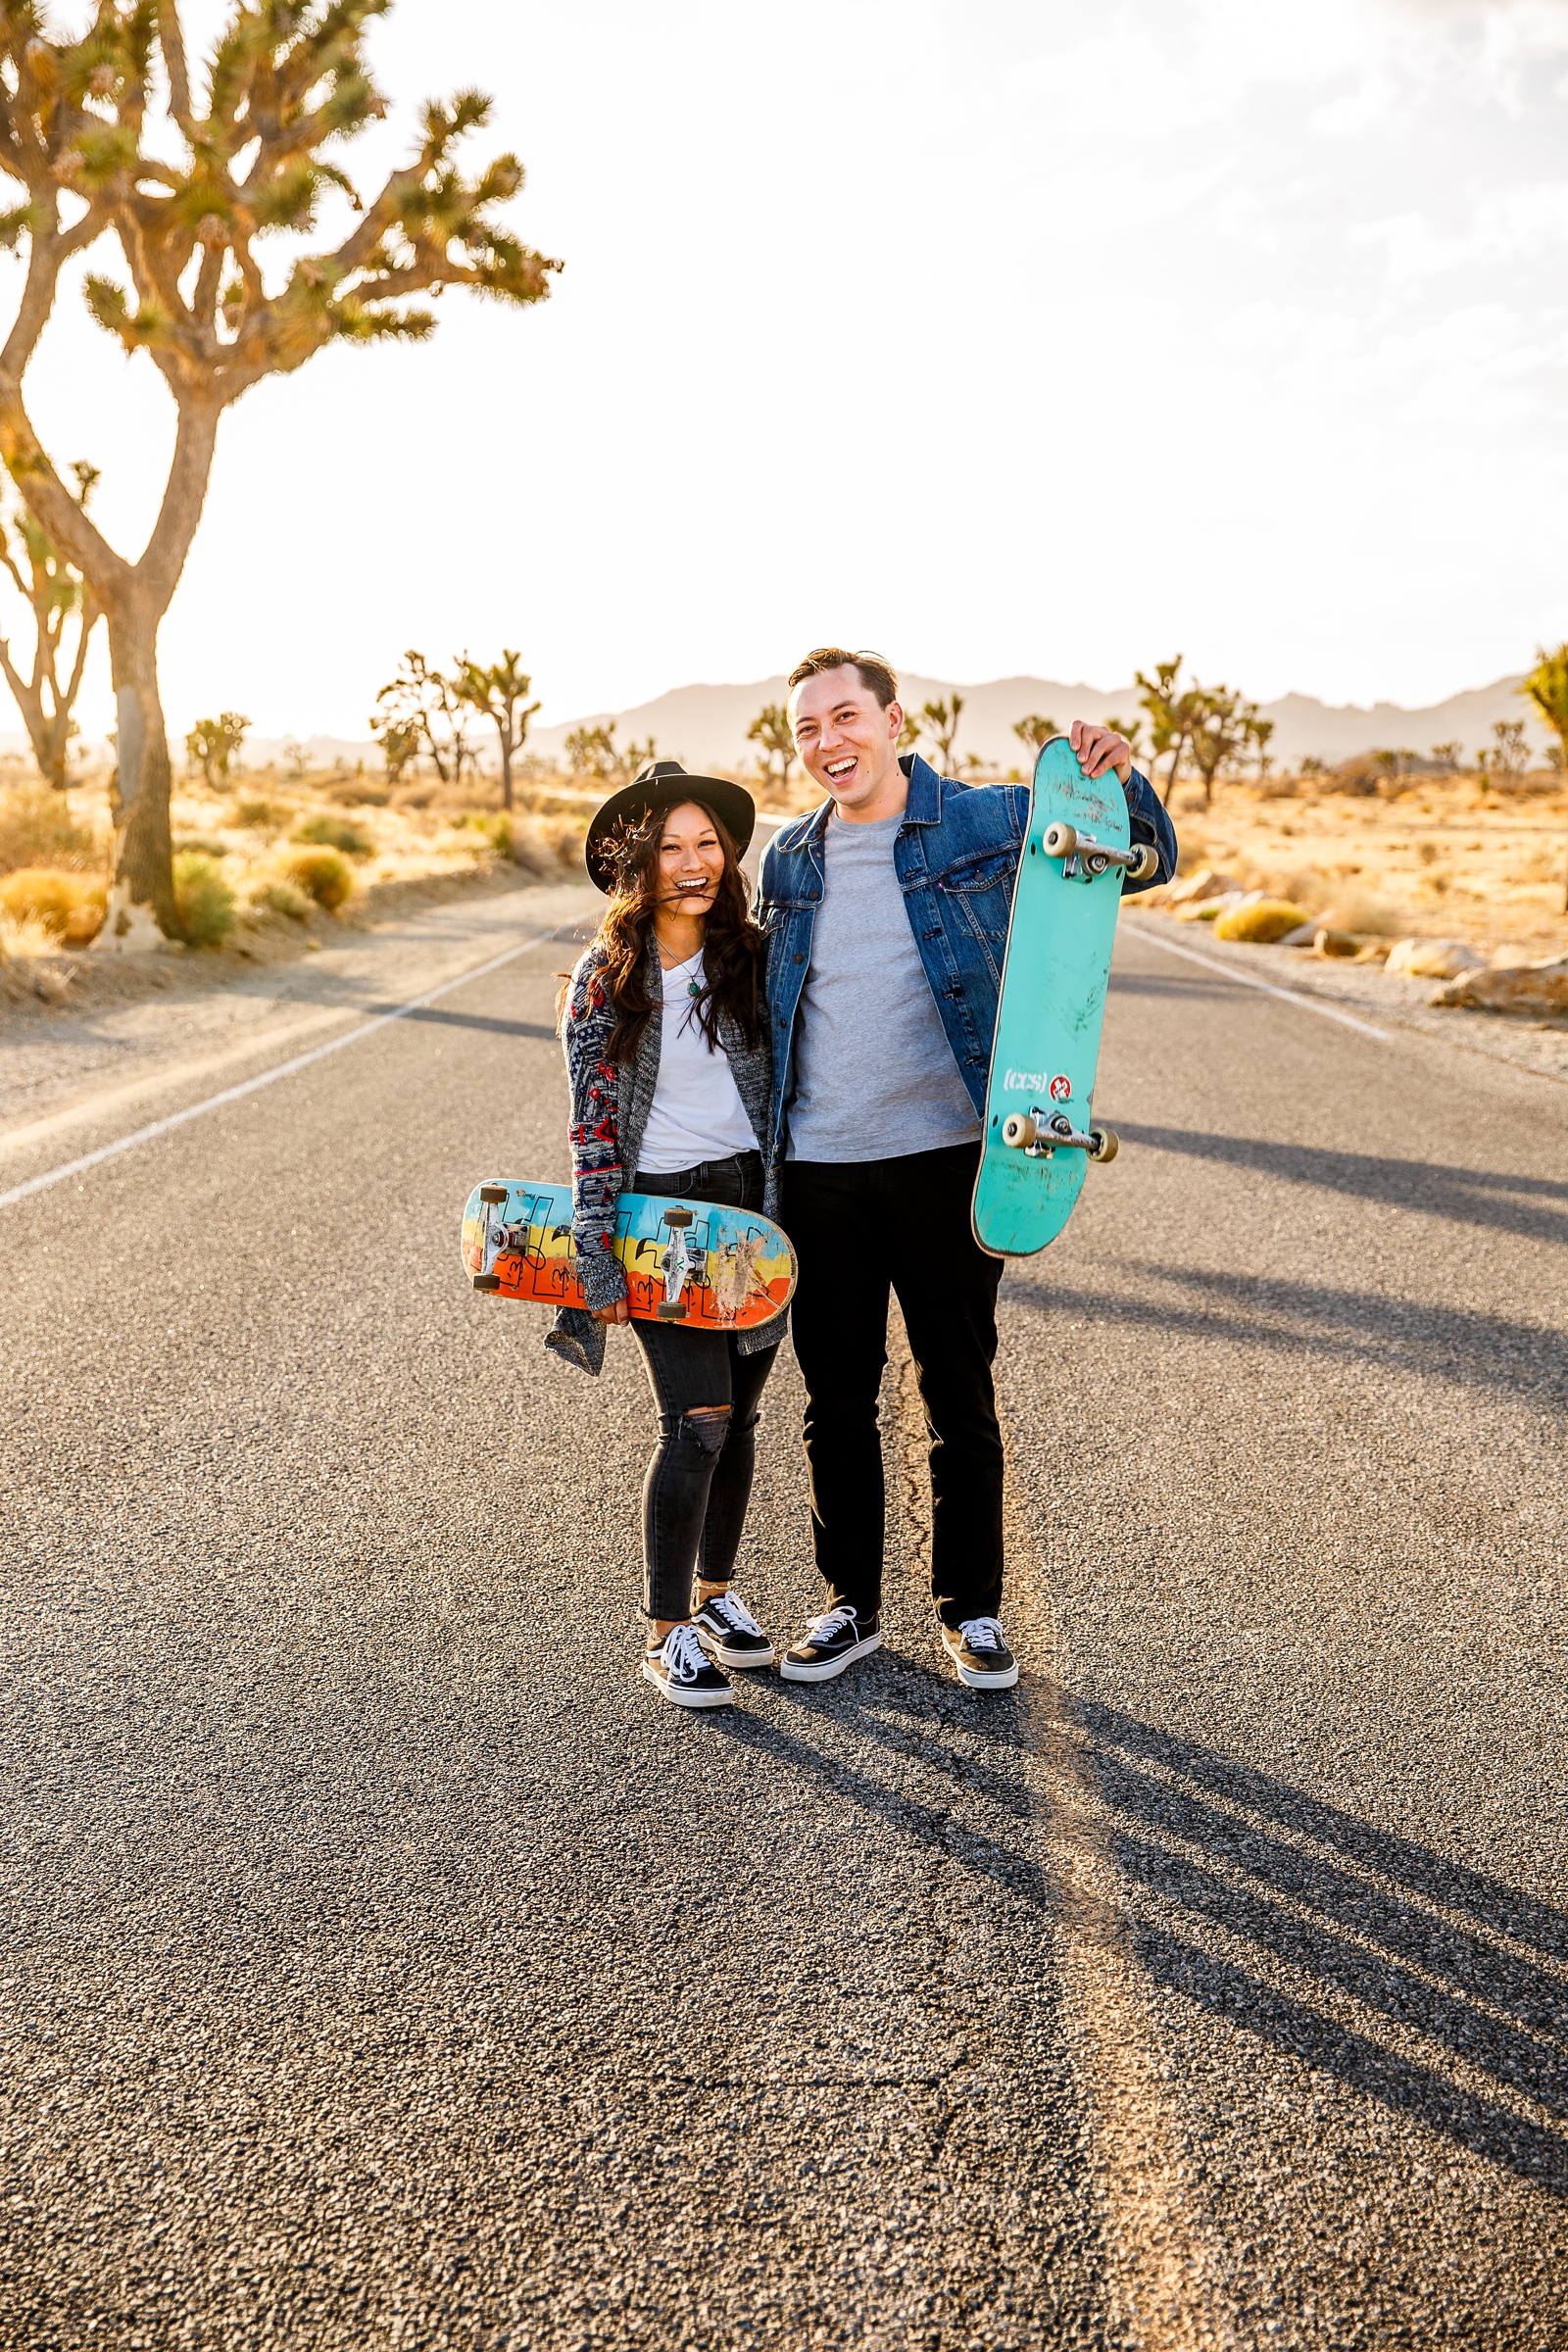 This engaged couple wanted to skateboard in Joshua Tree NP!